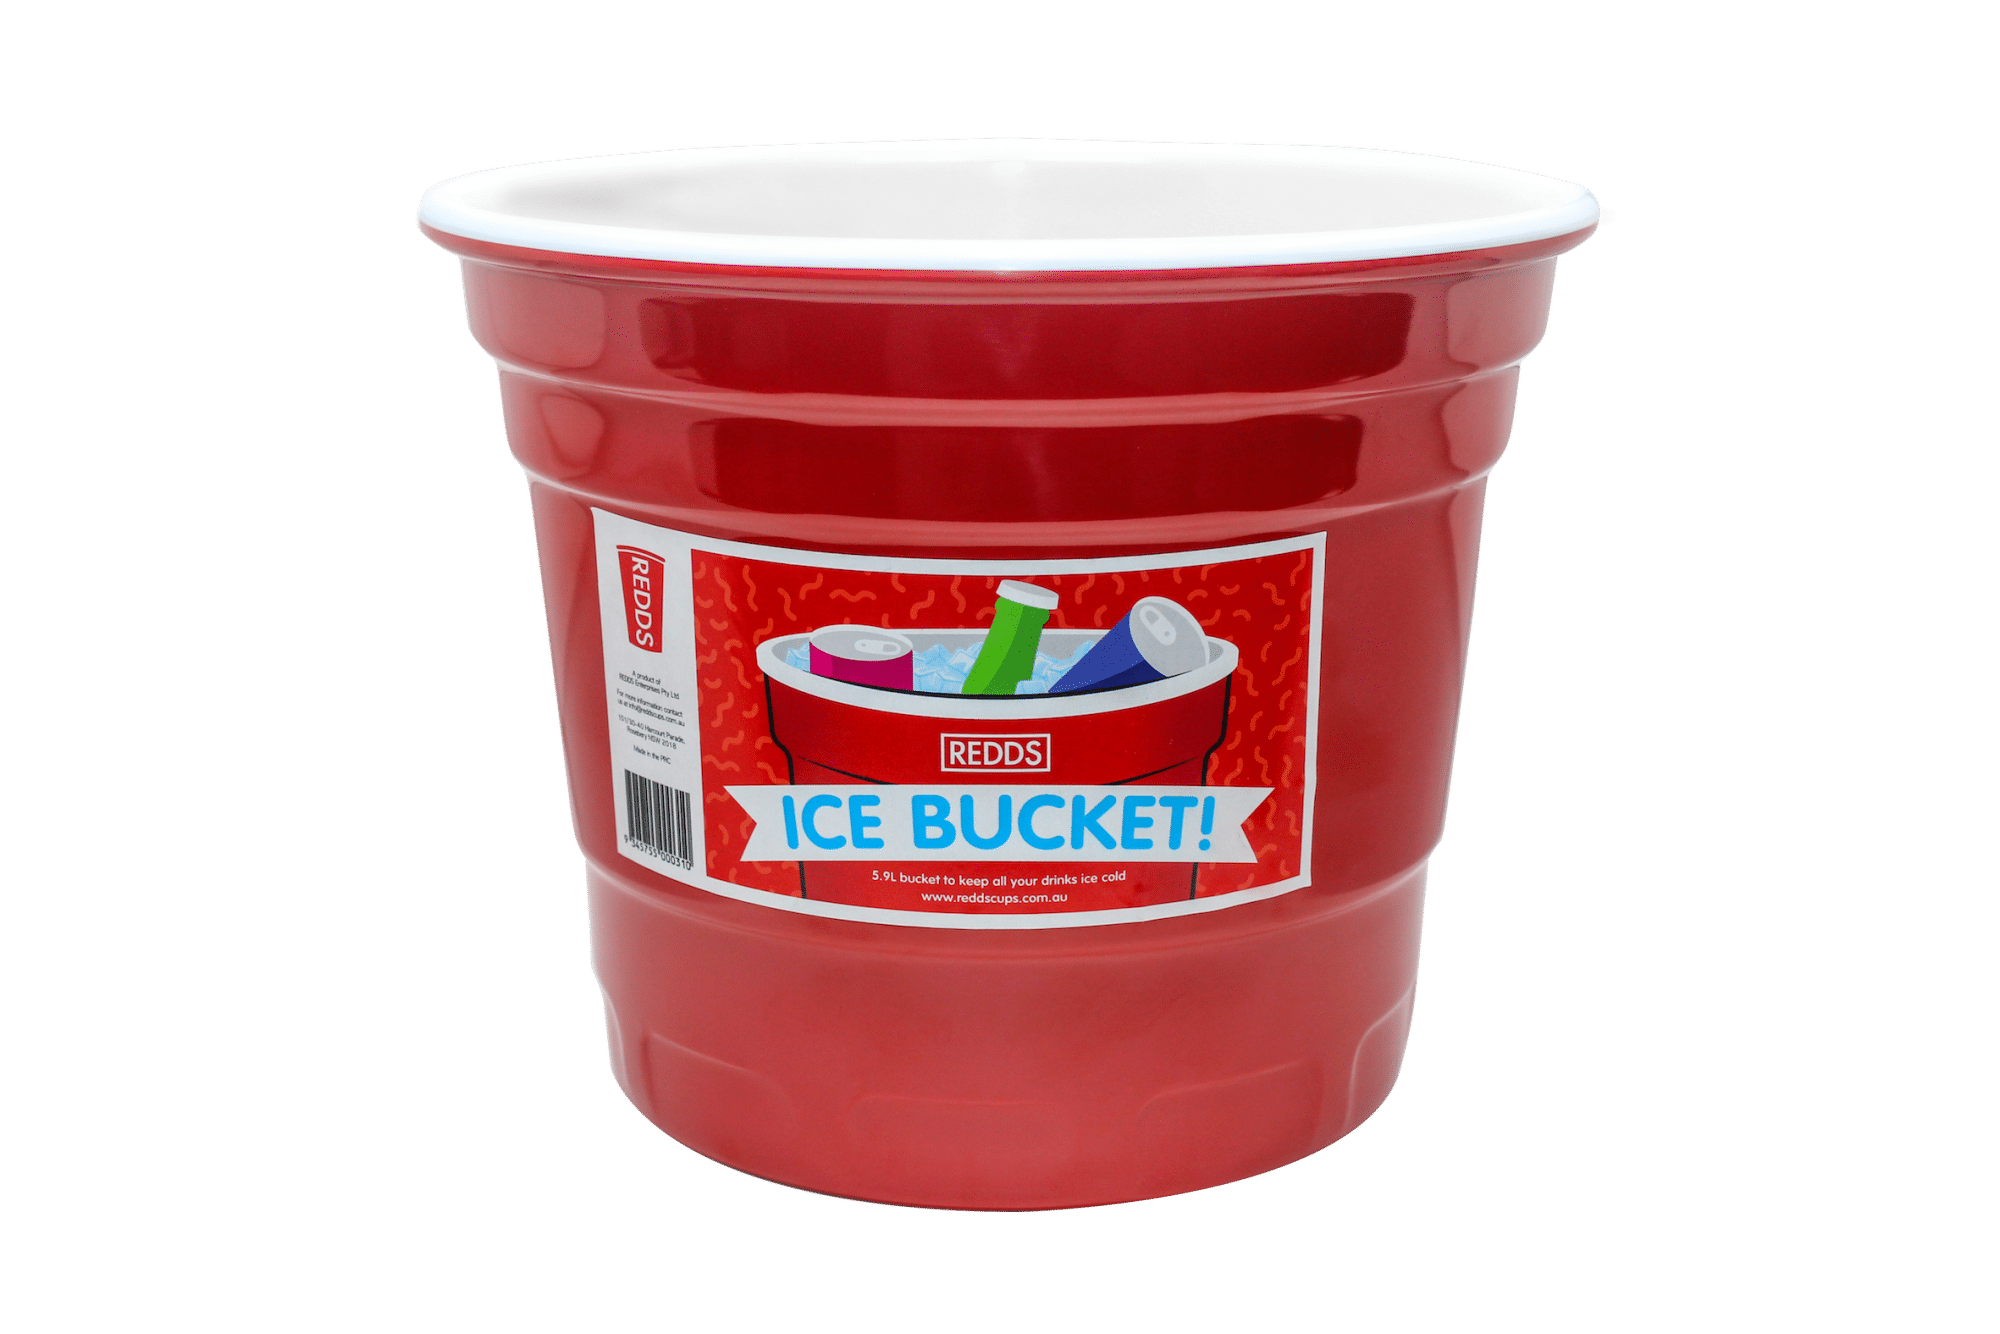 Giant red cup ice bucket